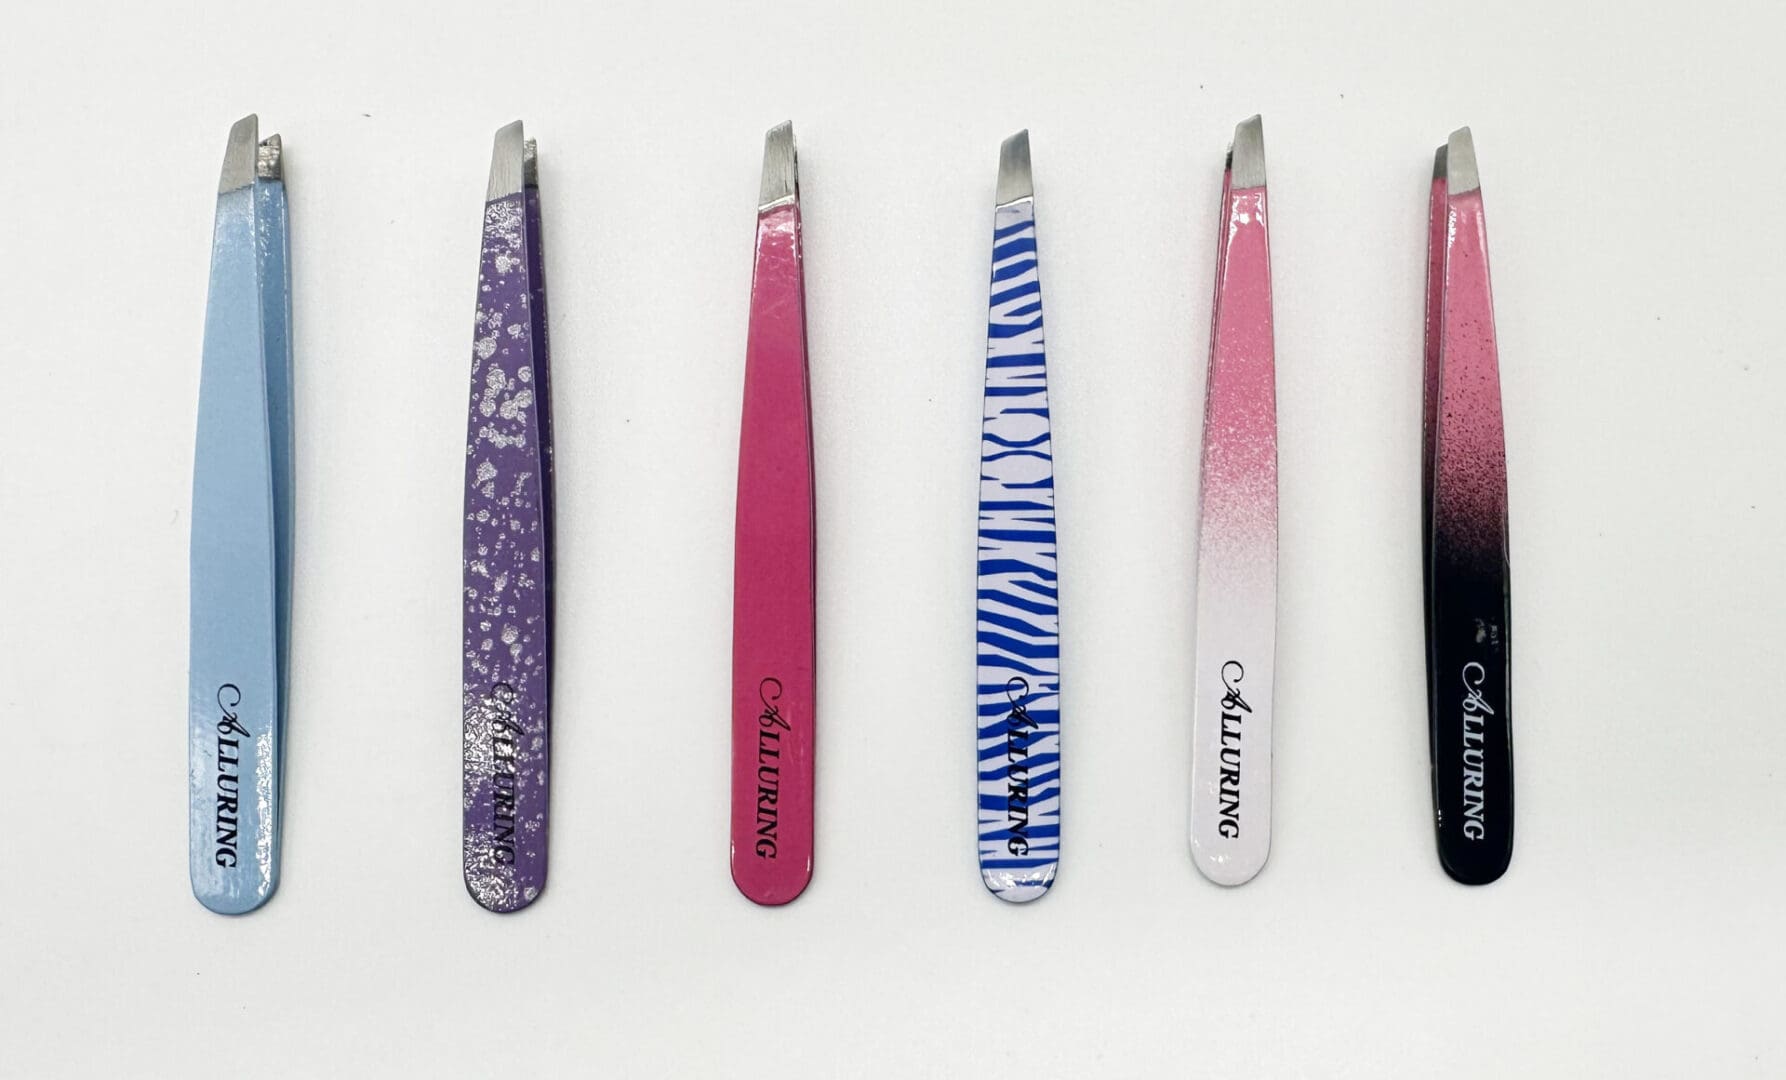 A row of different colored tweezers on top of each other.